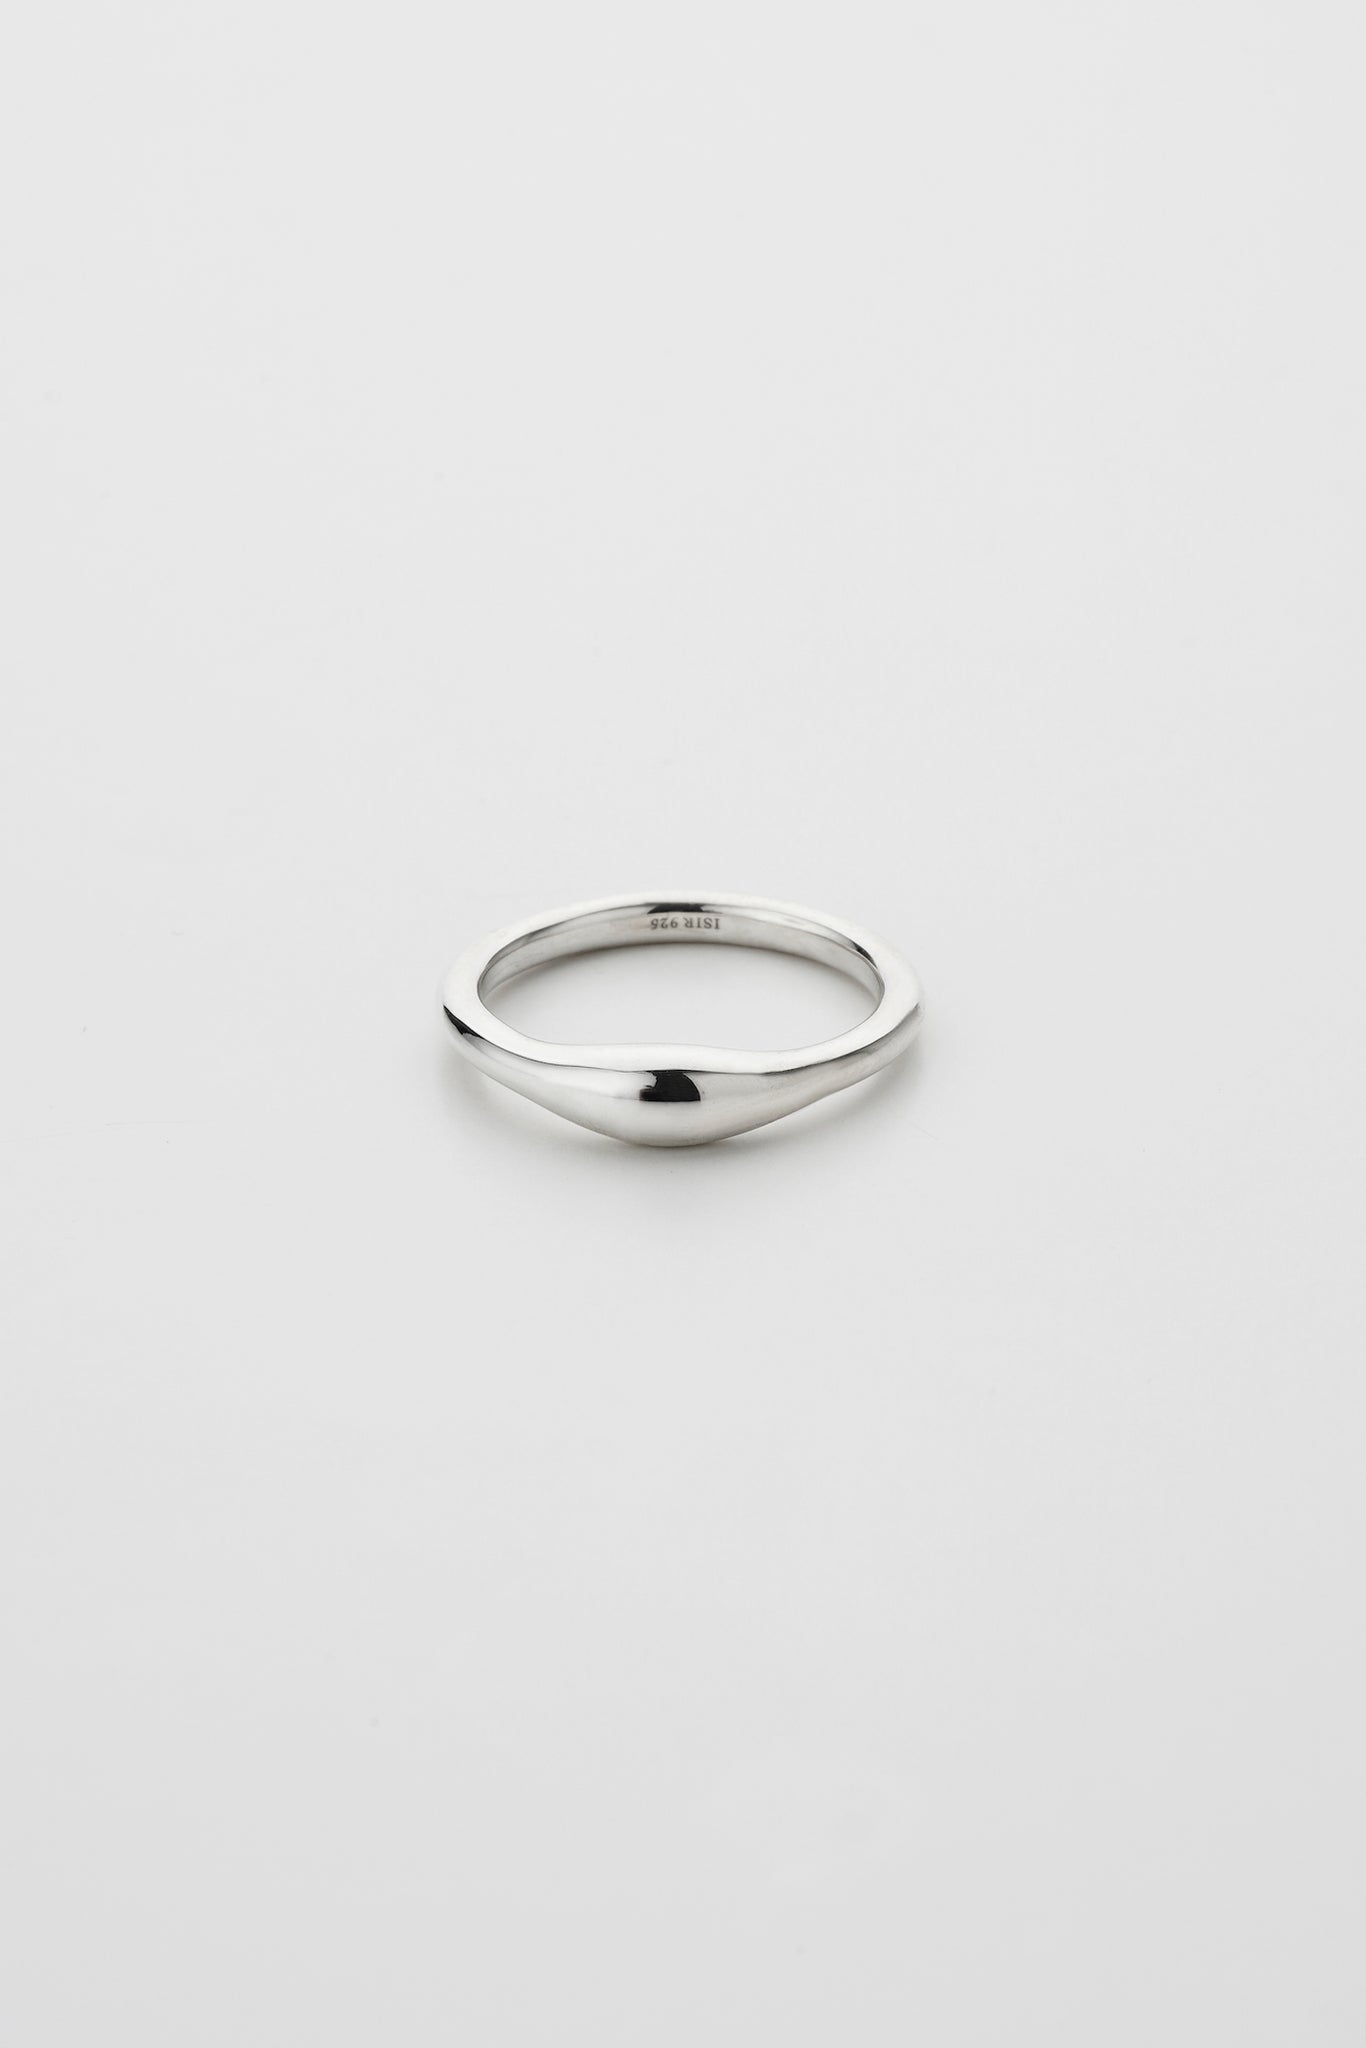 IN RING (SILVER925)